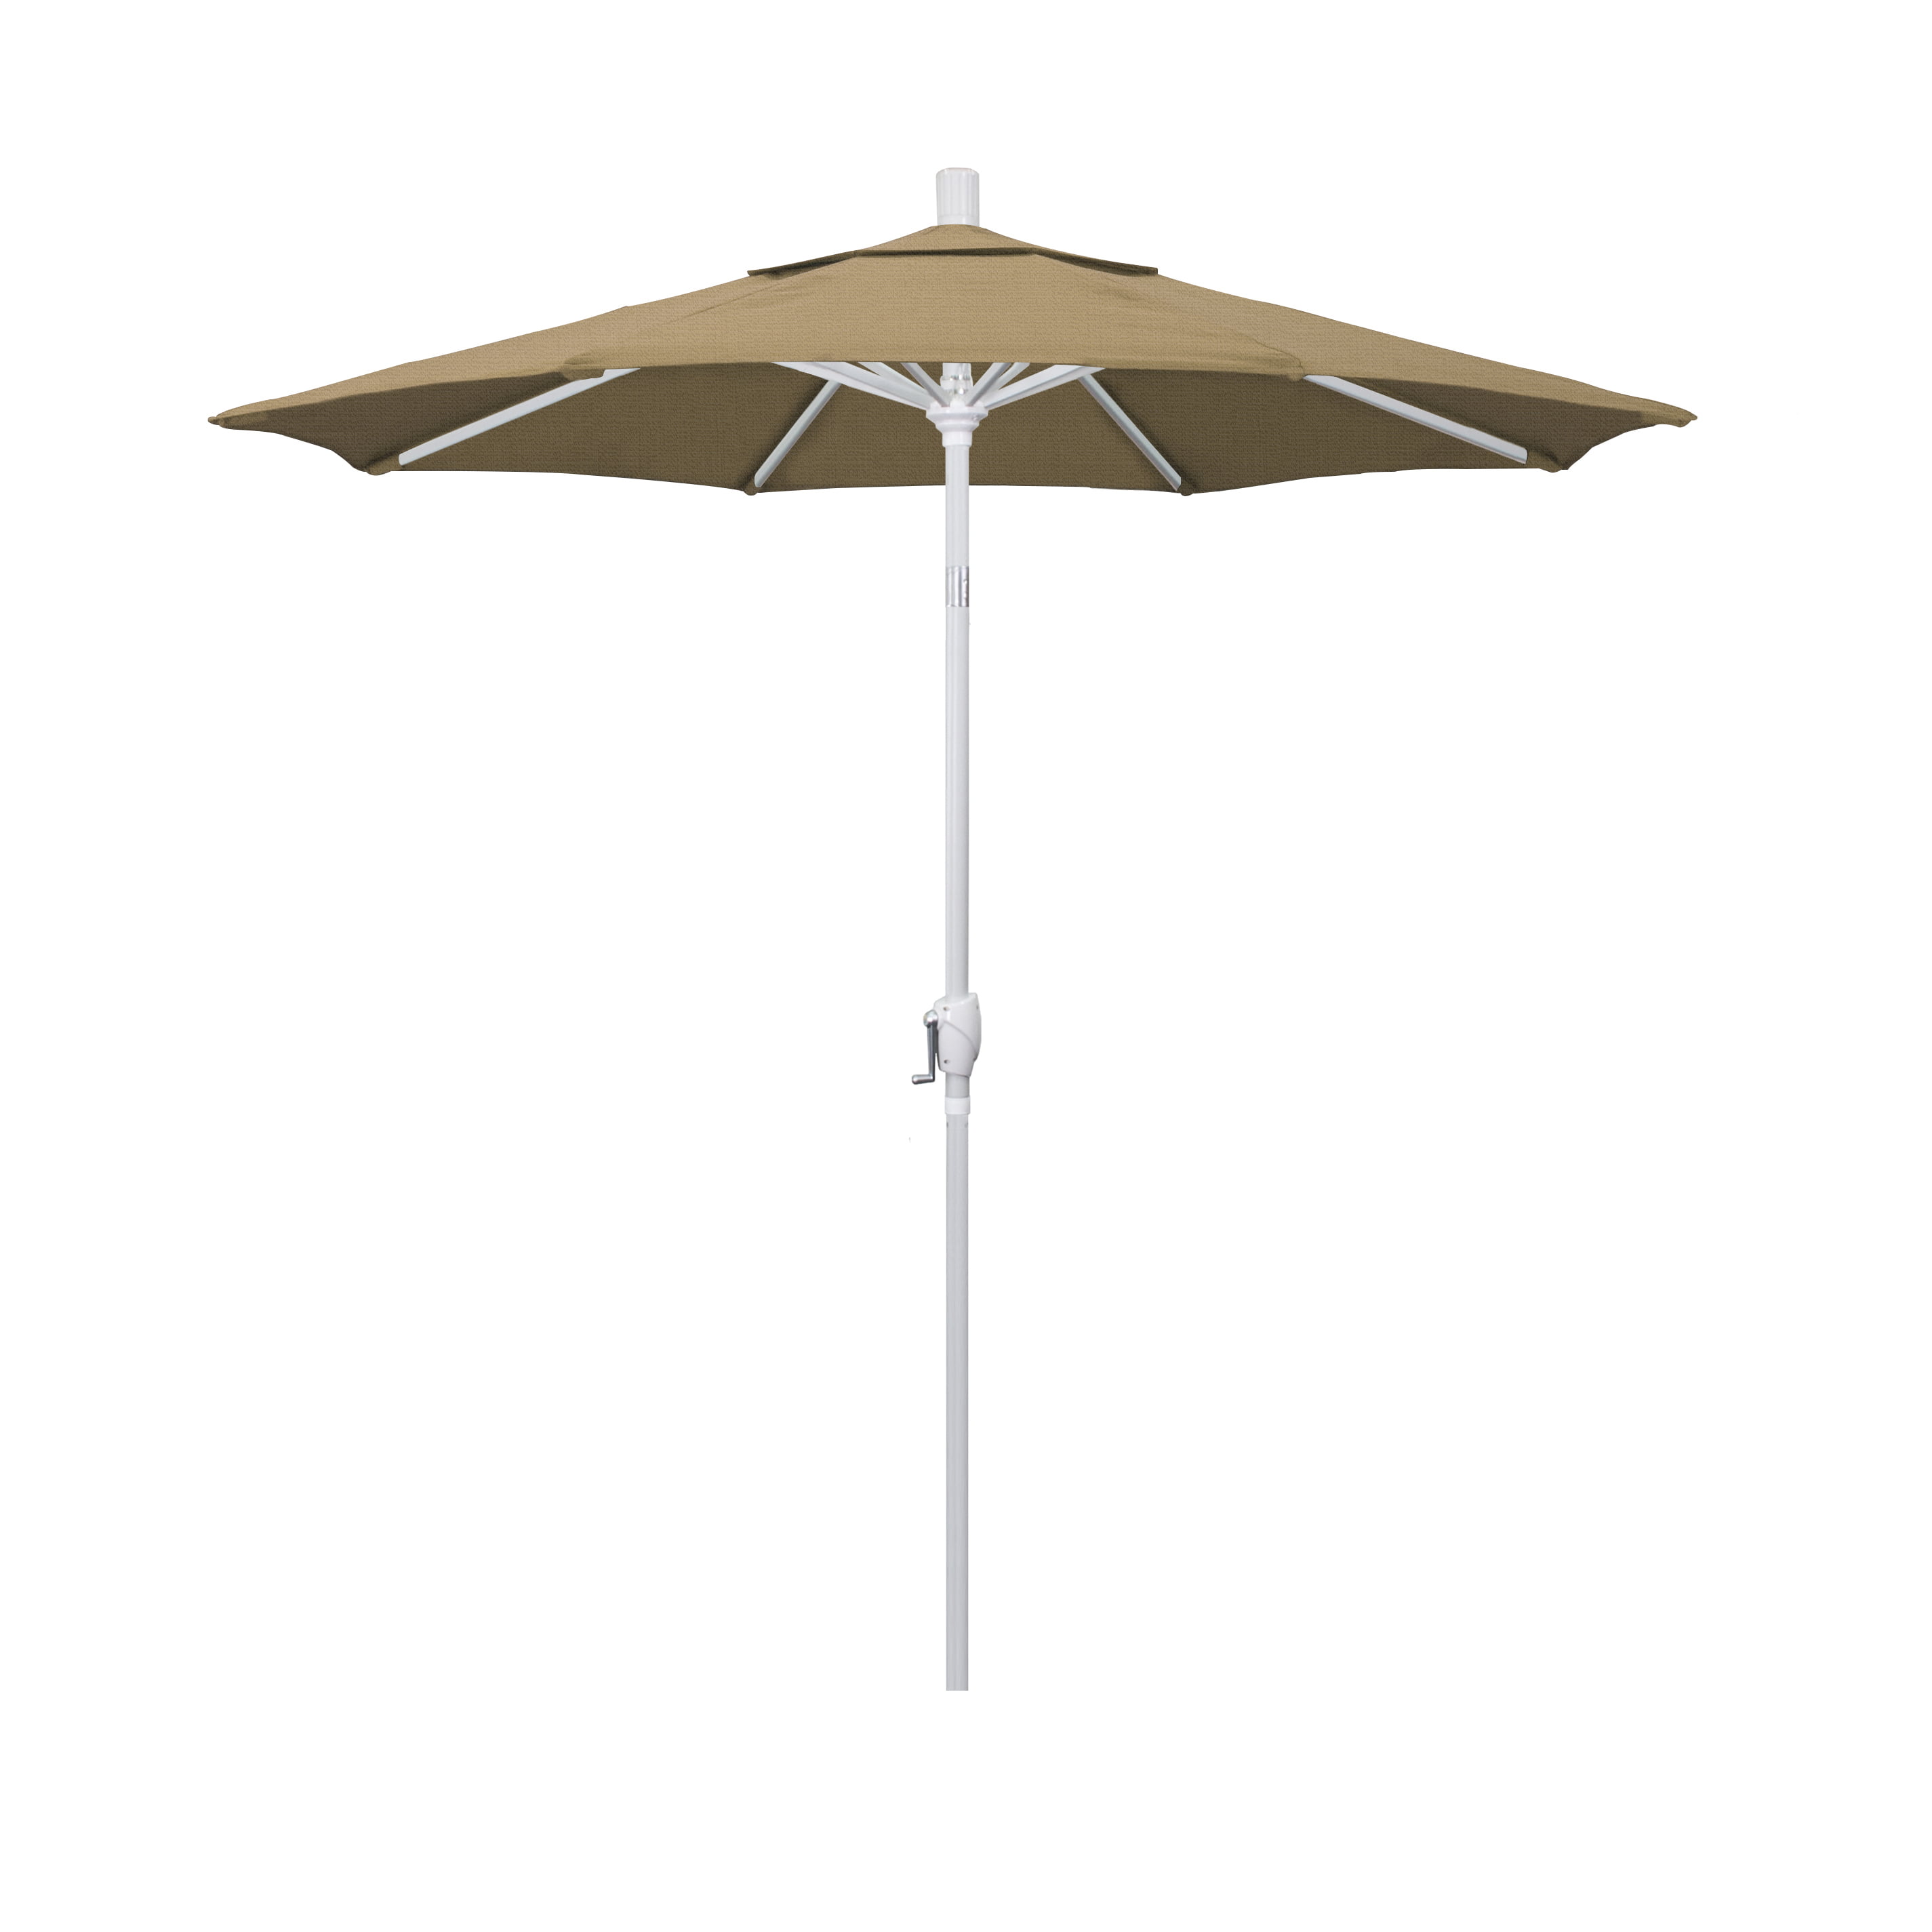 California Umbrella Replacement Canopy Cover in Royal Blue Olefin      7 1/2’ 